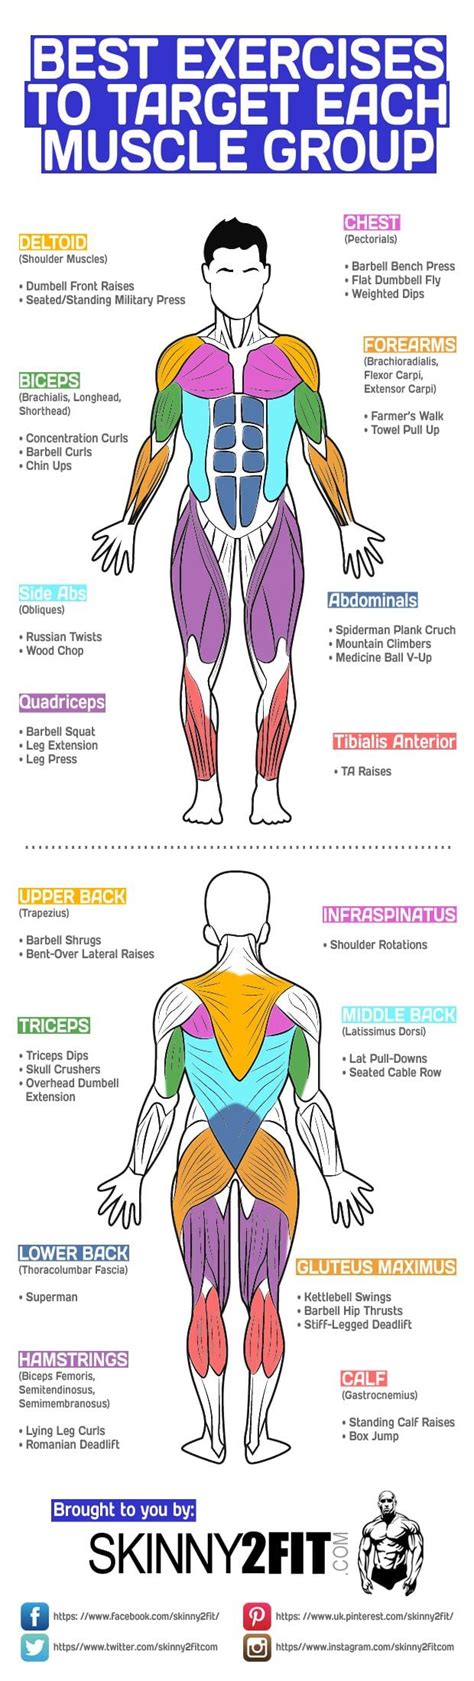 Best Exercises To Target Each Muscle Group